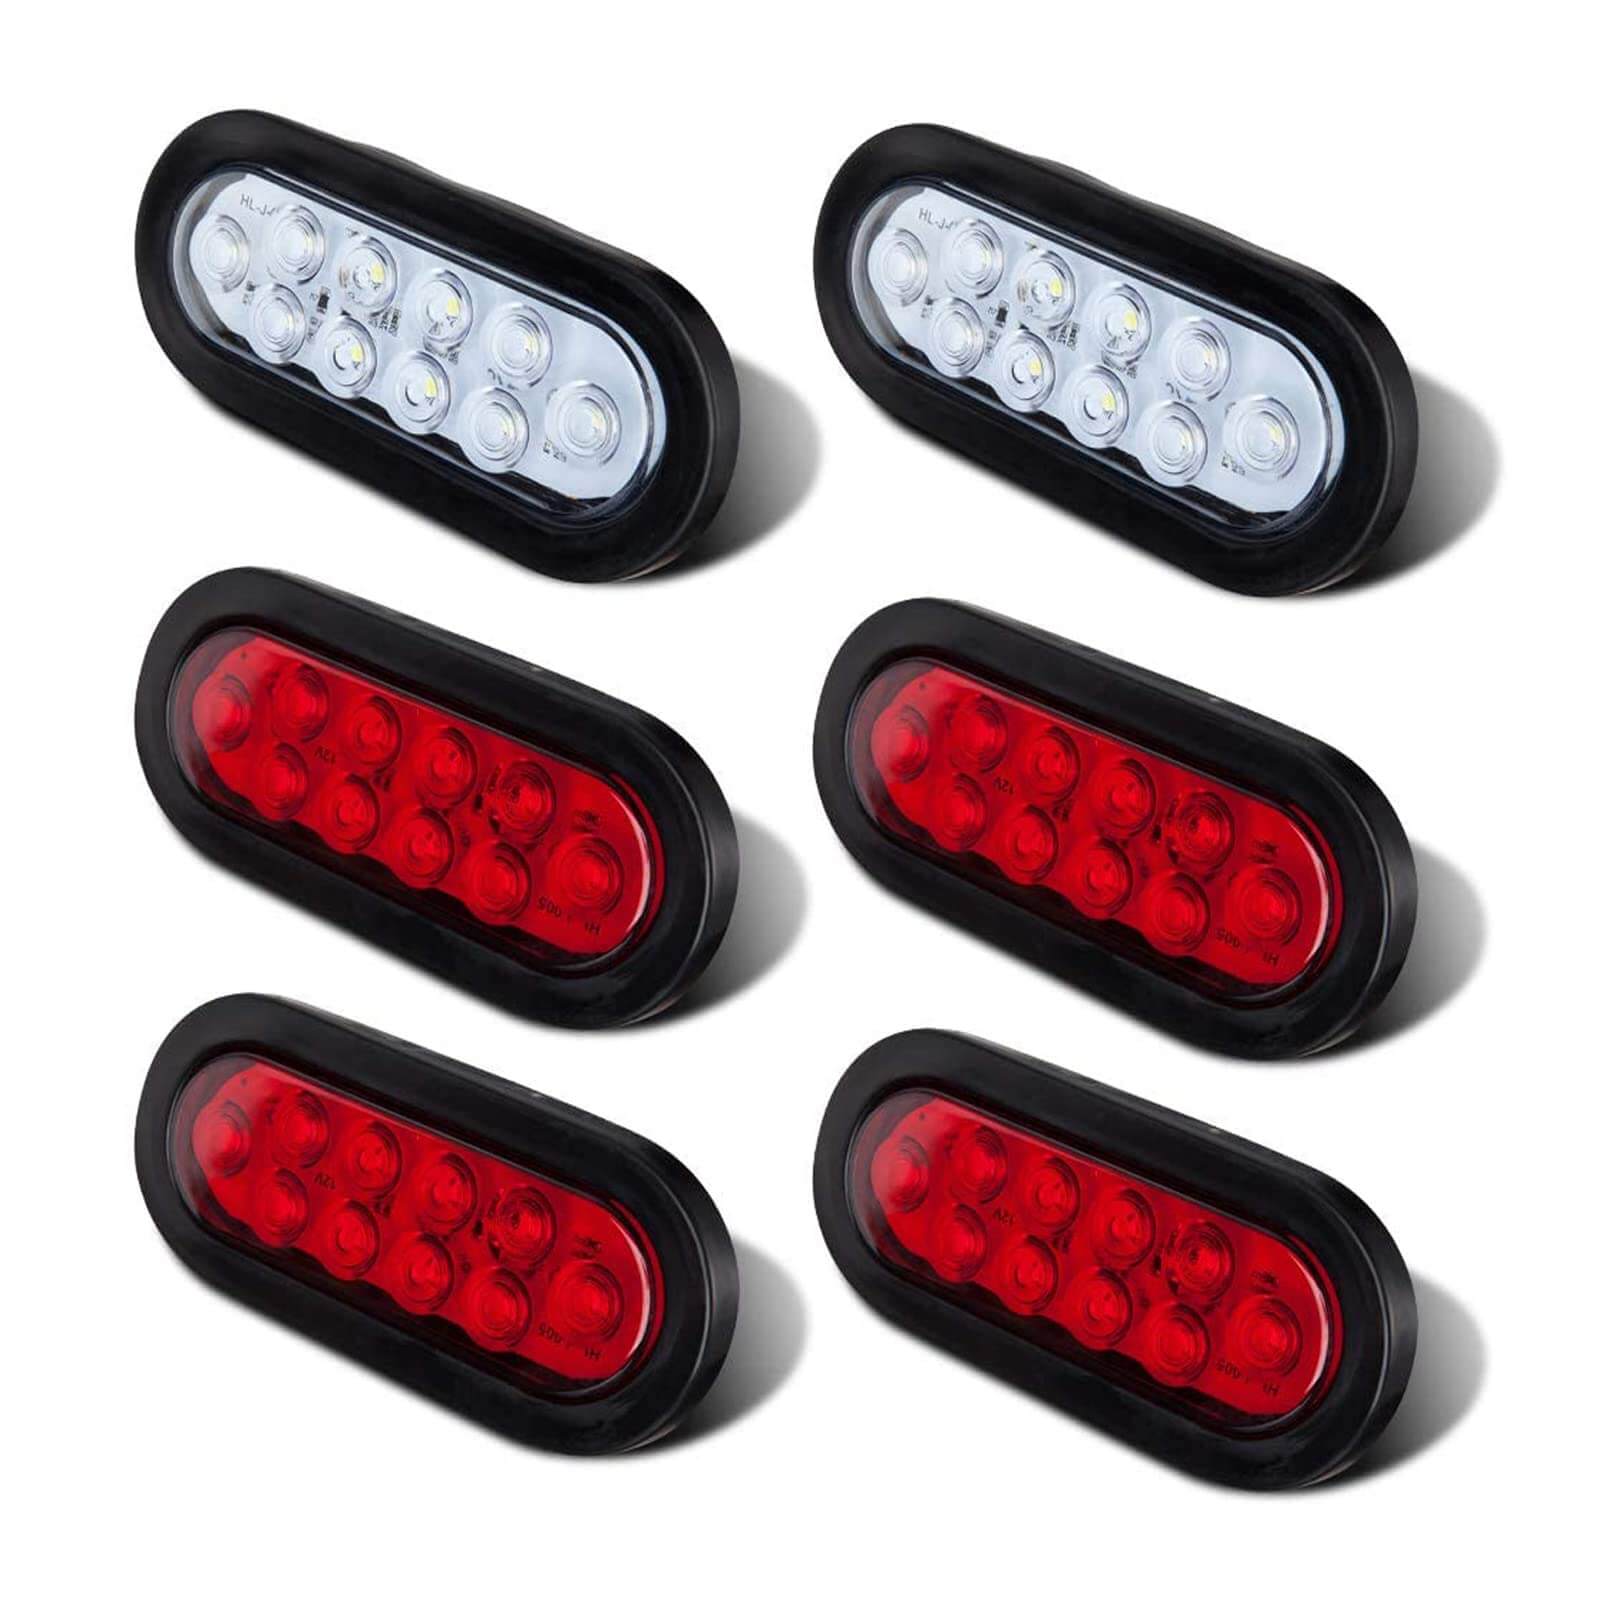 6 Inch Oval 4 RED 2 White LED Stop/Turn/Tail Lights – LIMICAR LED